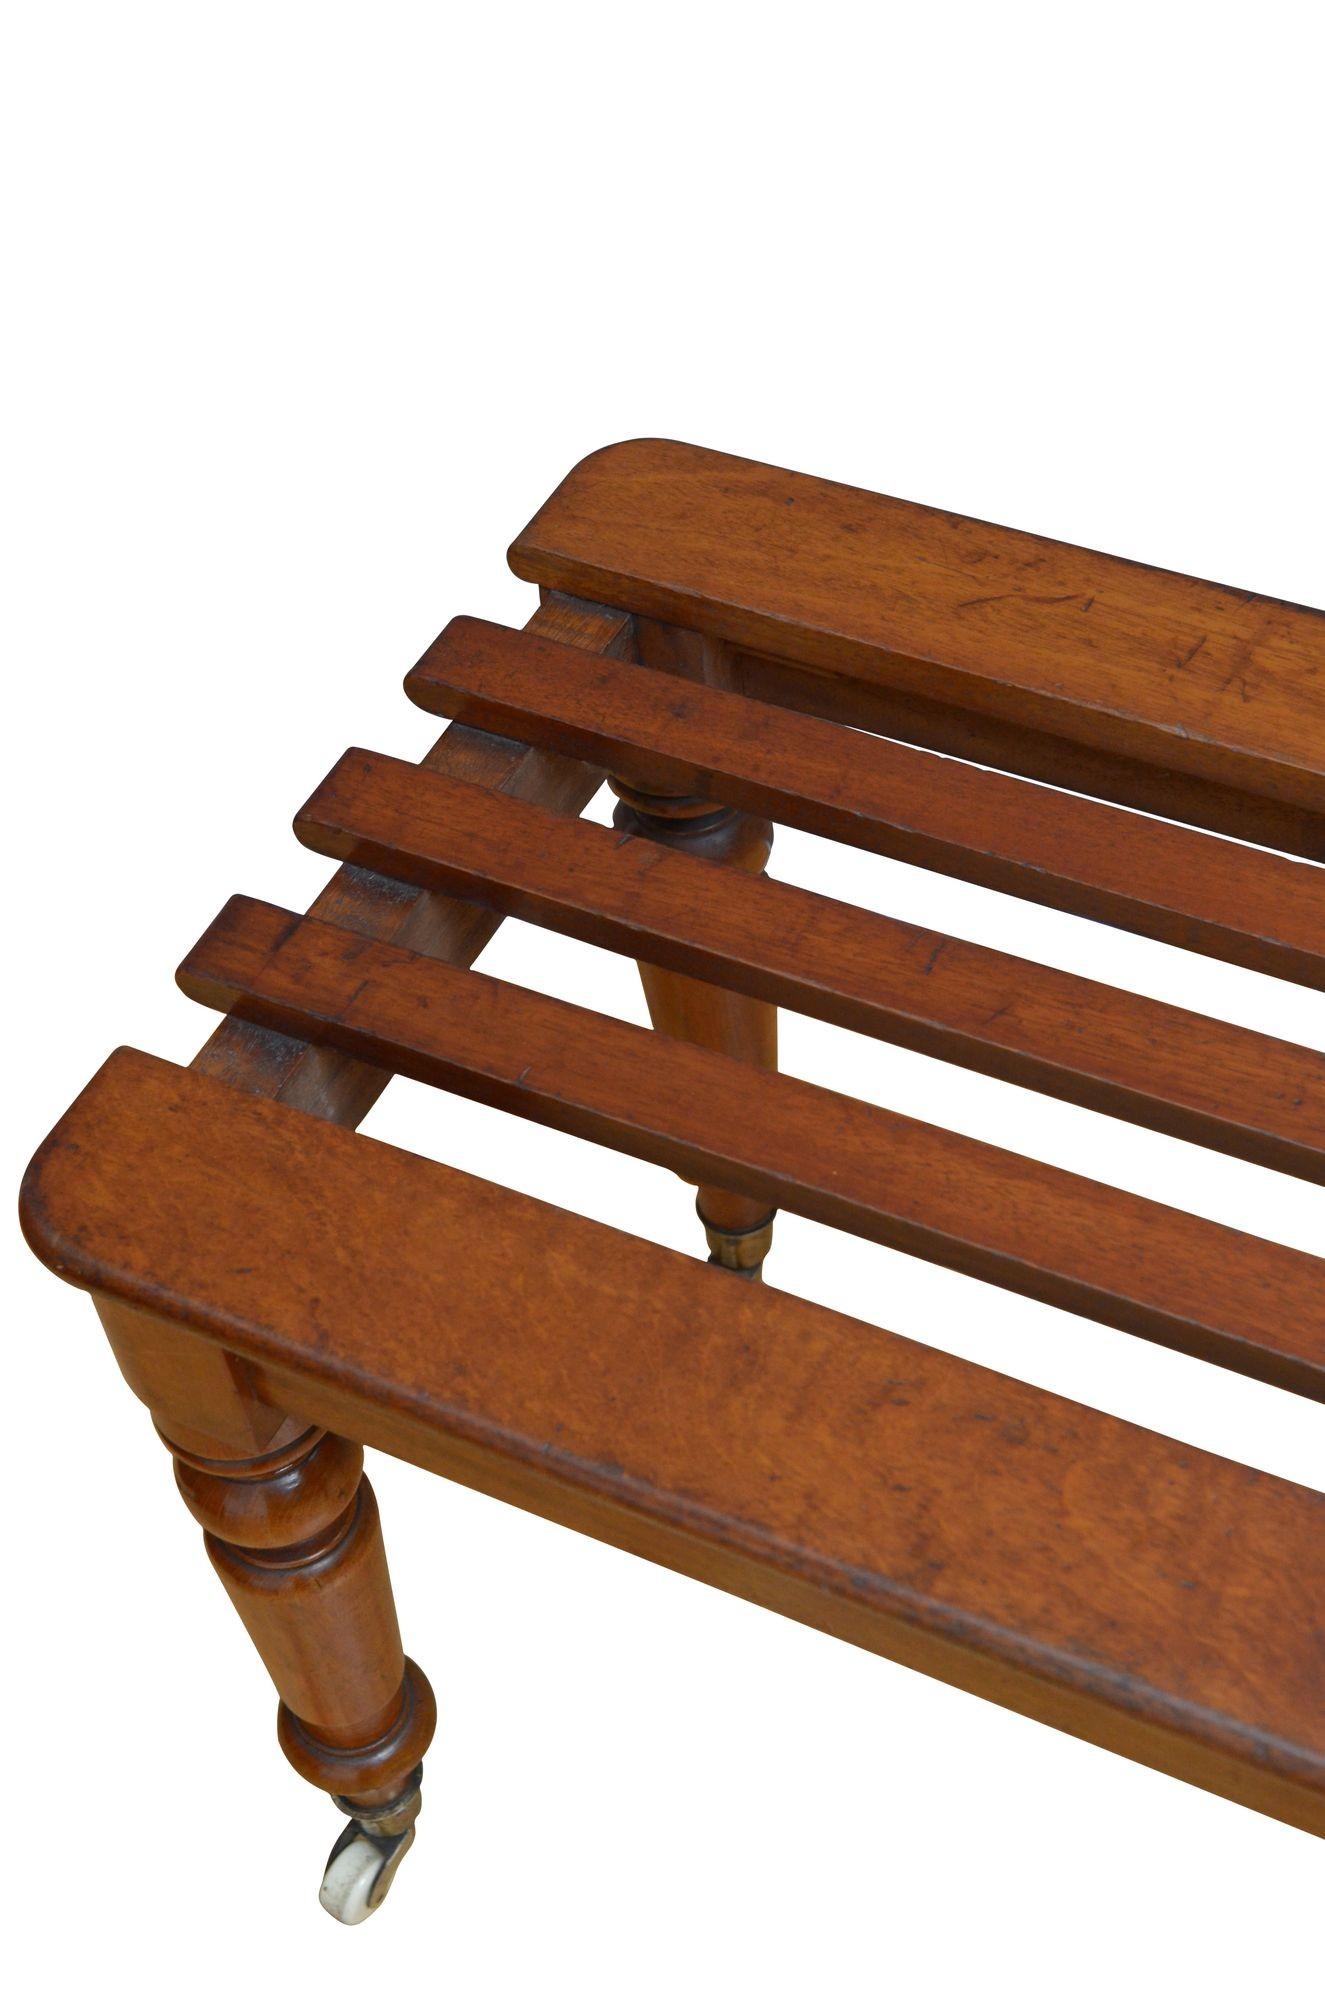 Superb English Victorian Hall Bench Luggage Rack In Good Condition For Sale In Whaley Bridge, GB